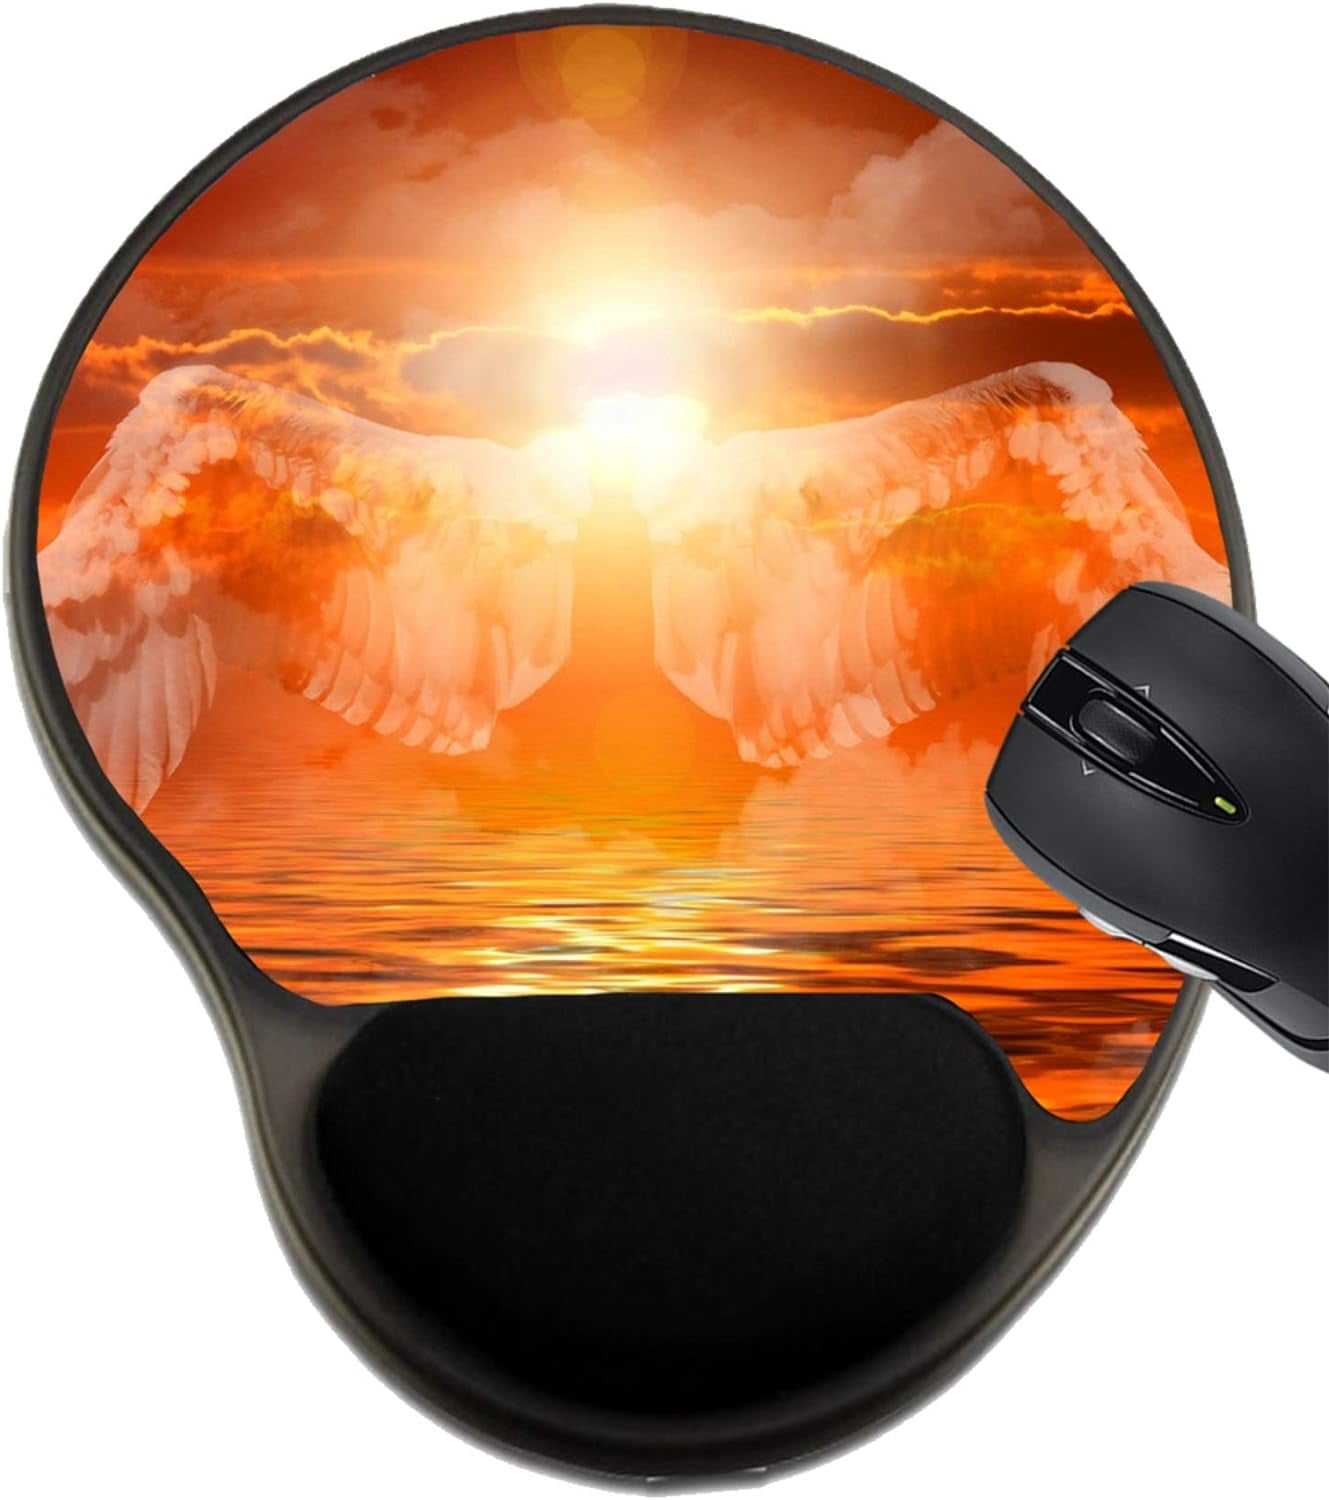 Mousepad Wrist Rest Protected Mouse Padsmat With Wrist Support Design For Sunset Sky Sun Light 3982